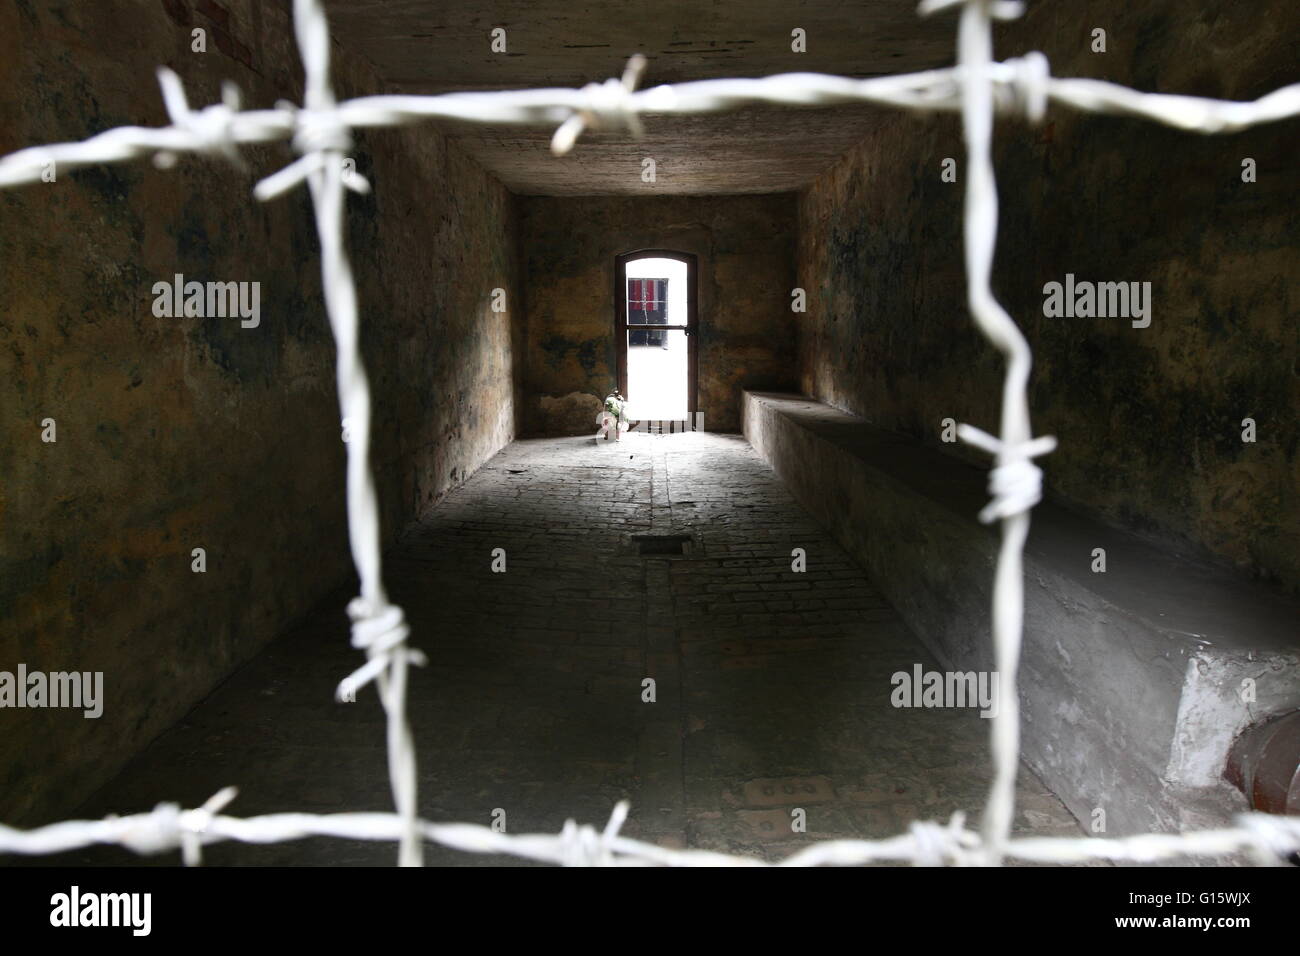 Sztutowo, Poland 9th, May 2016 People attend the 71st anniversary of the liberation of the Nazi German concentration camp, KL Stutthof in Sztutowo. The day commemorates the Soviet Army's liberation of  the Nazi concentration camp, Stutthof. Gas chamber is seen. Credit:  Michal Fludra/Alamy Live News Stock Photo